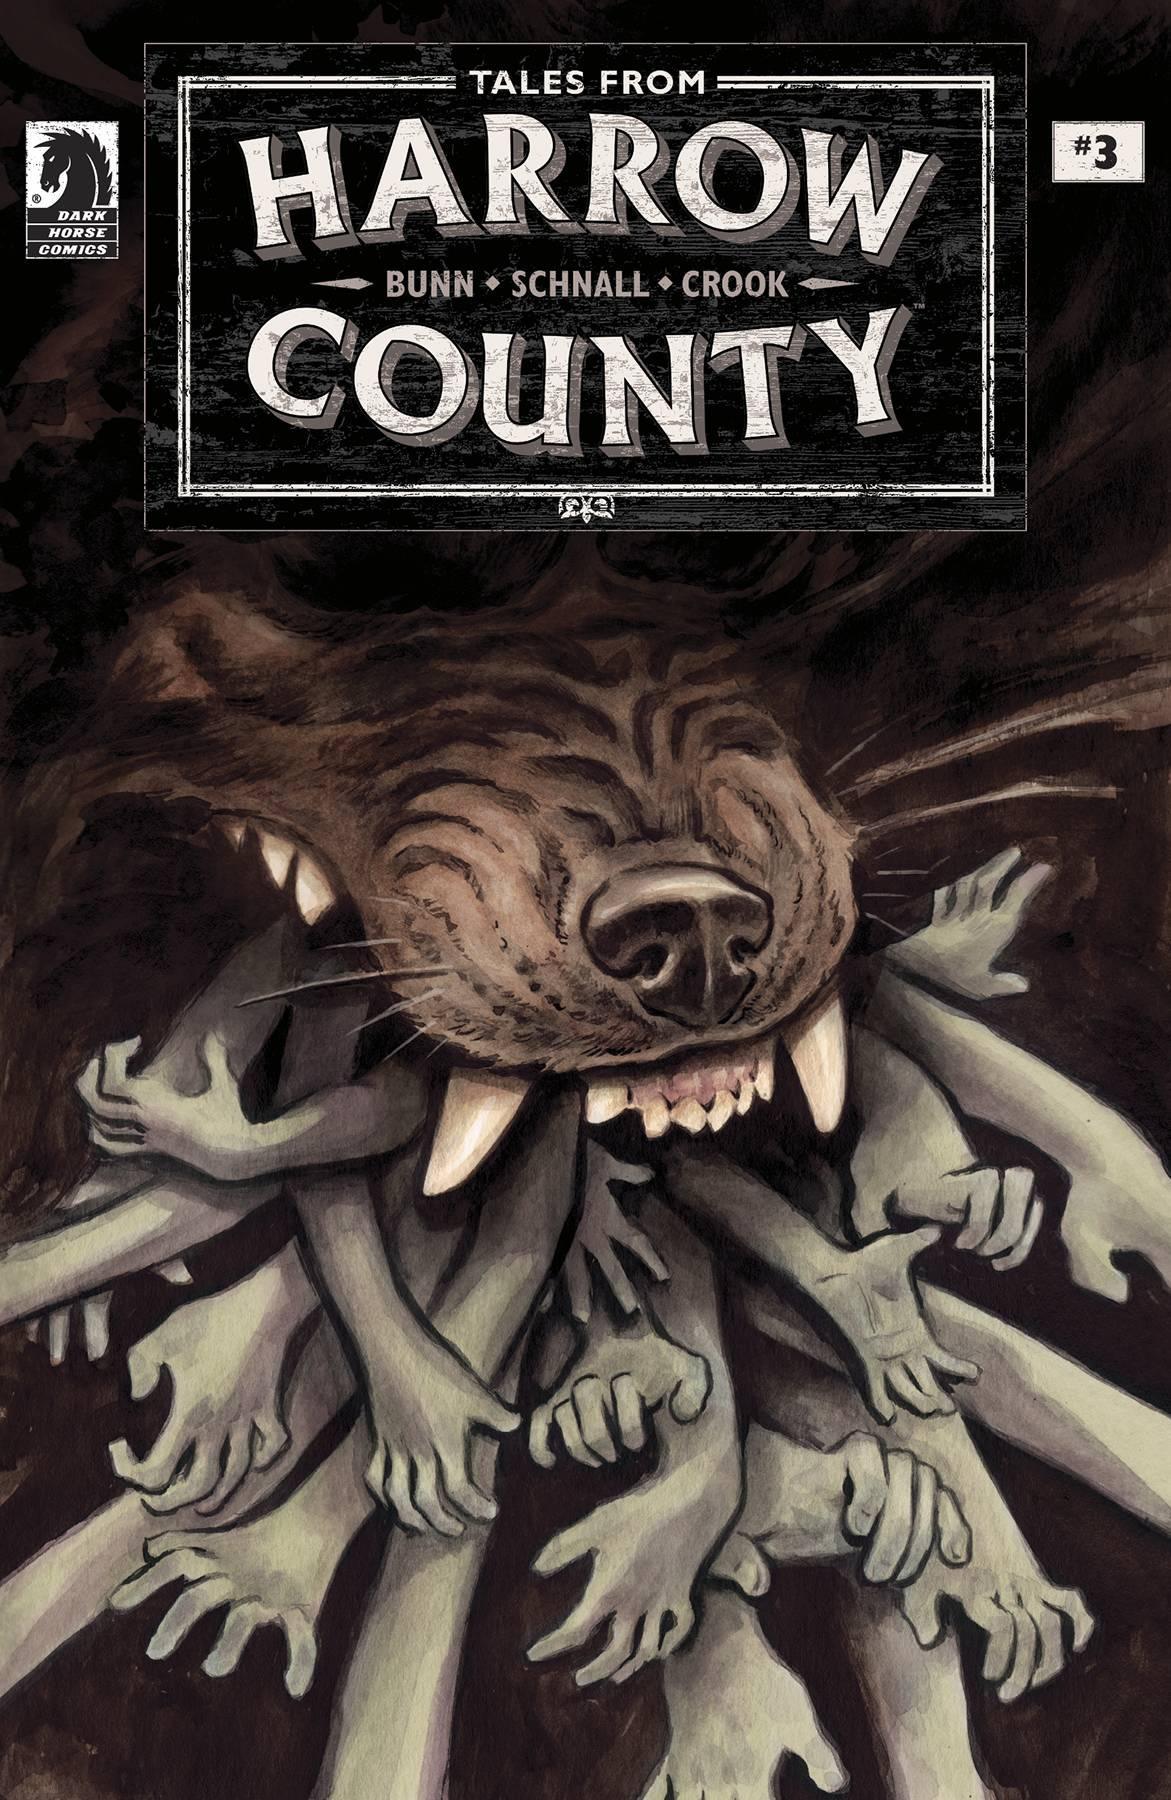 TALES FROM HARROW COUNTY LOST ONES #3 CVR A SCHNALL - Kings Comics